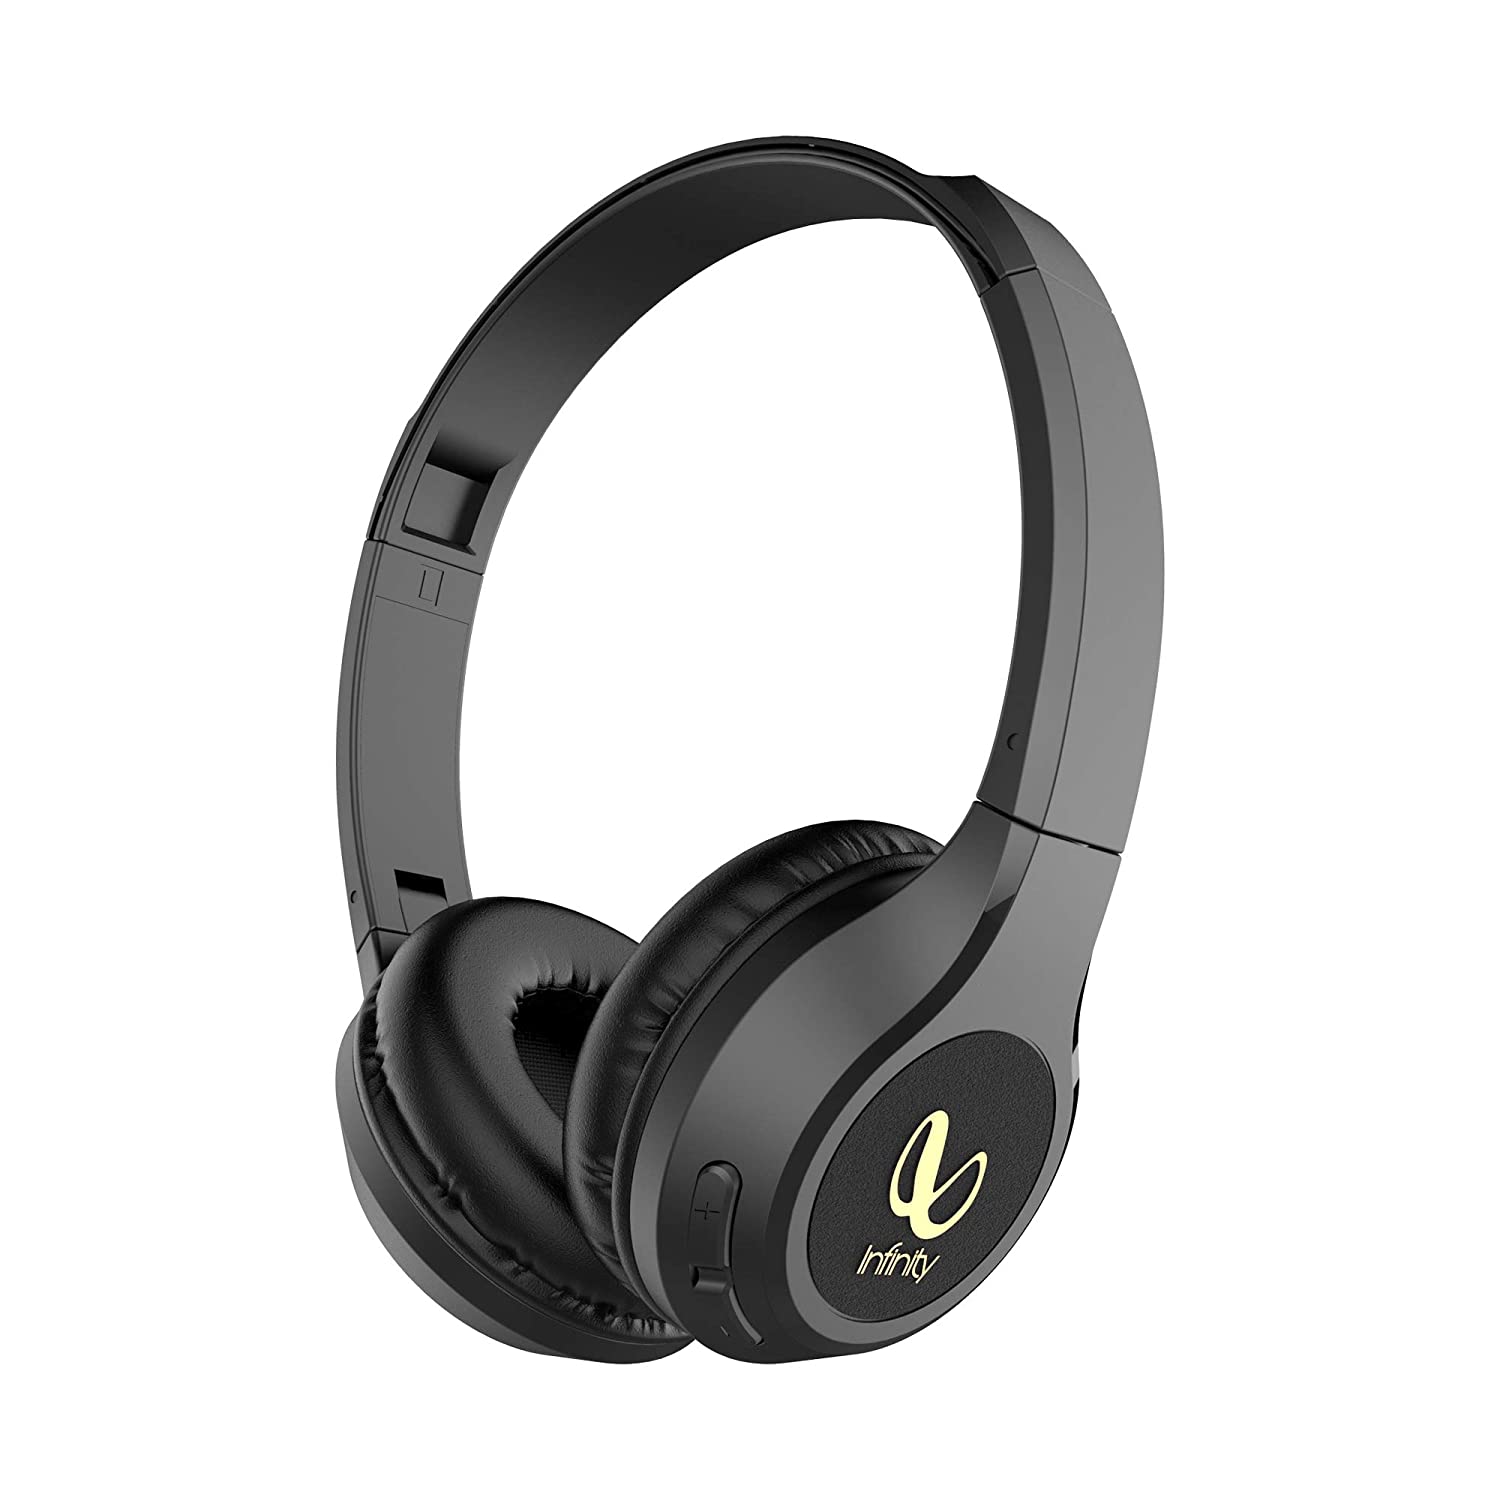 Infinity(JBL) Glide 510 On-Ear Wireless Headphone with Mic, 72 Hrs Playtime(Quick Charging), Dual Equalizer Deep Bass, Voice Assistant (Black)